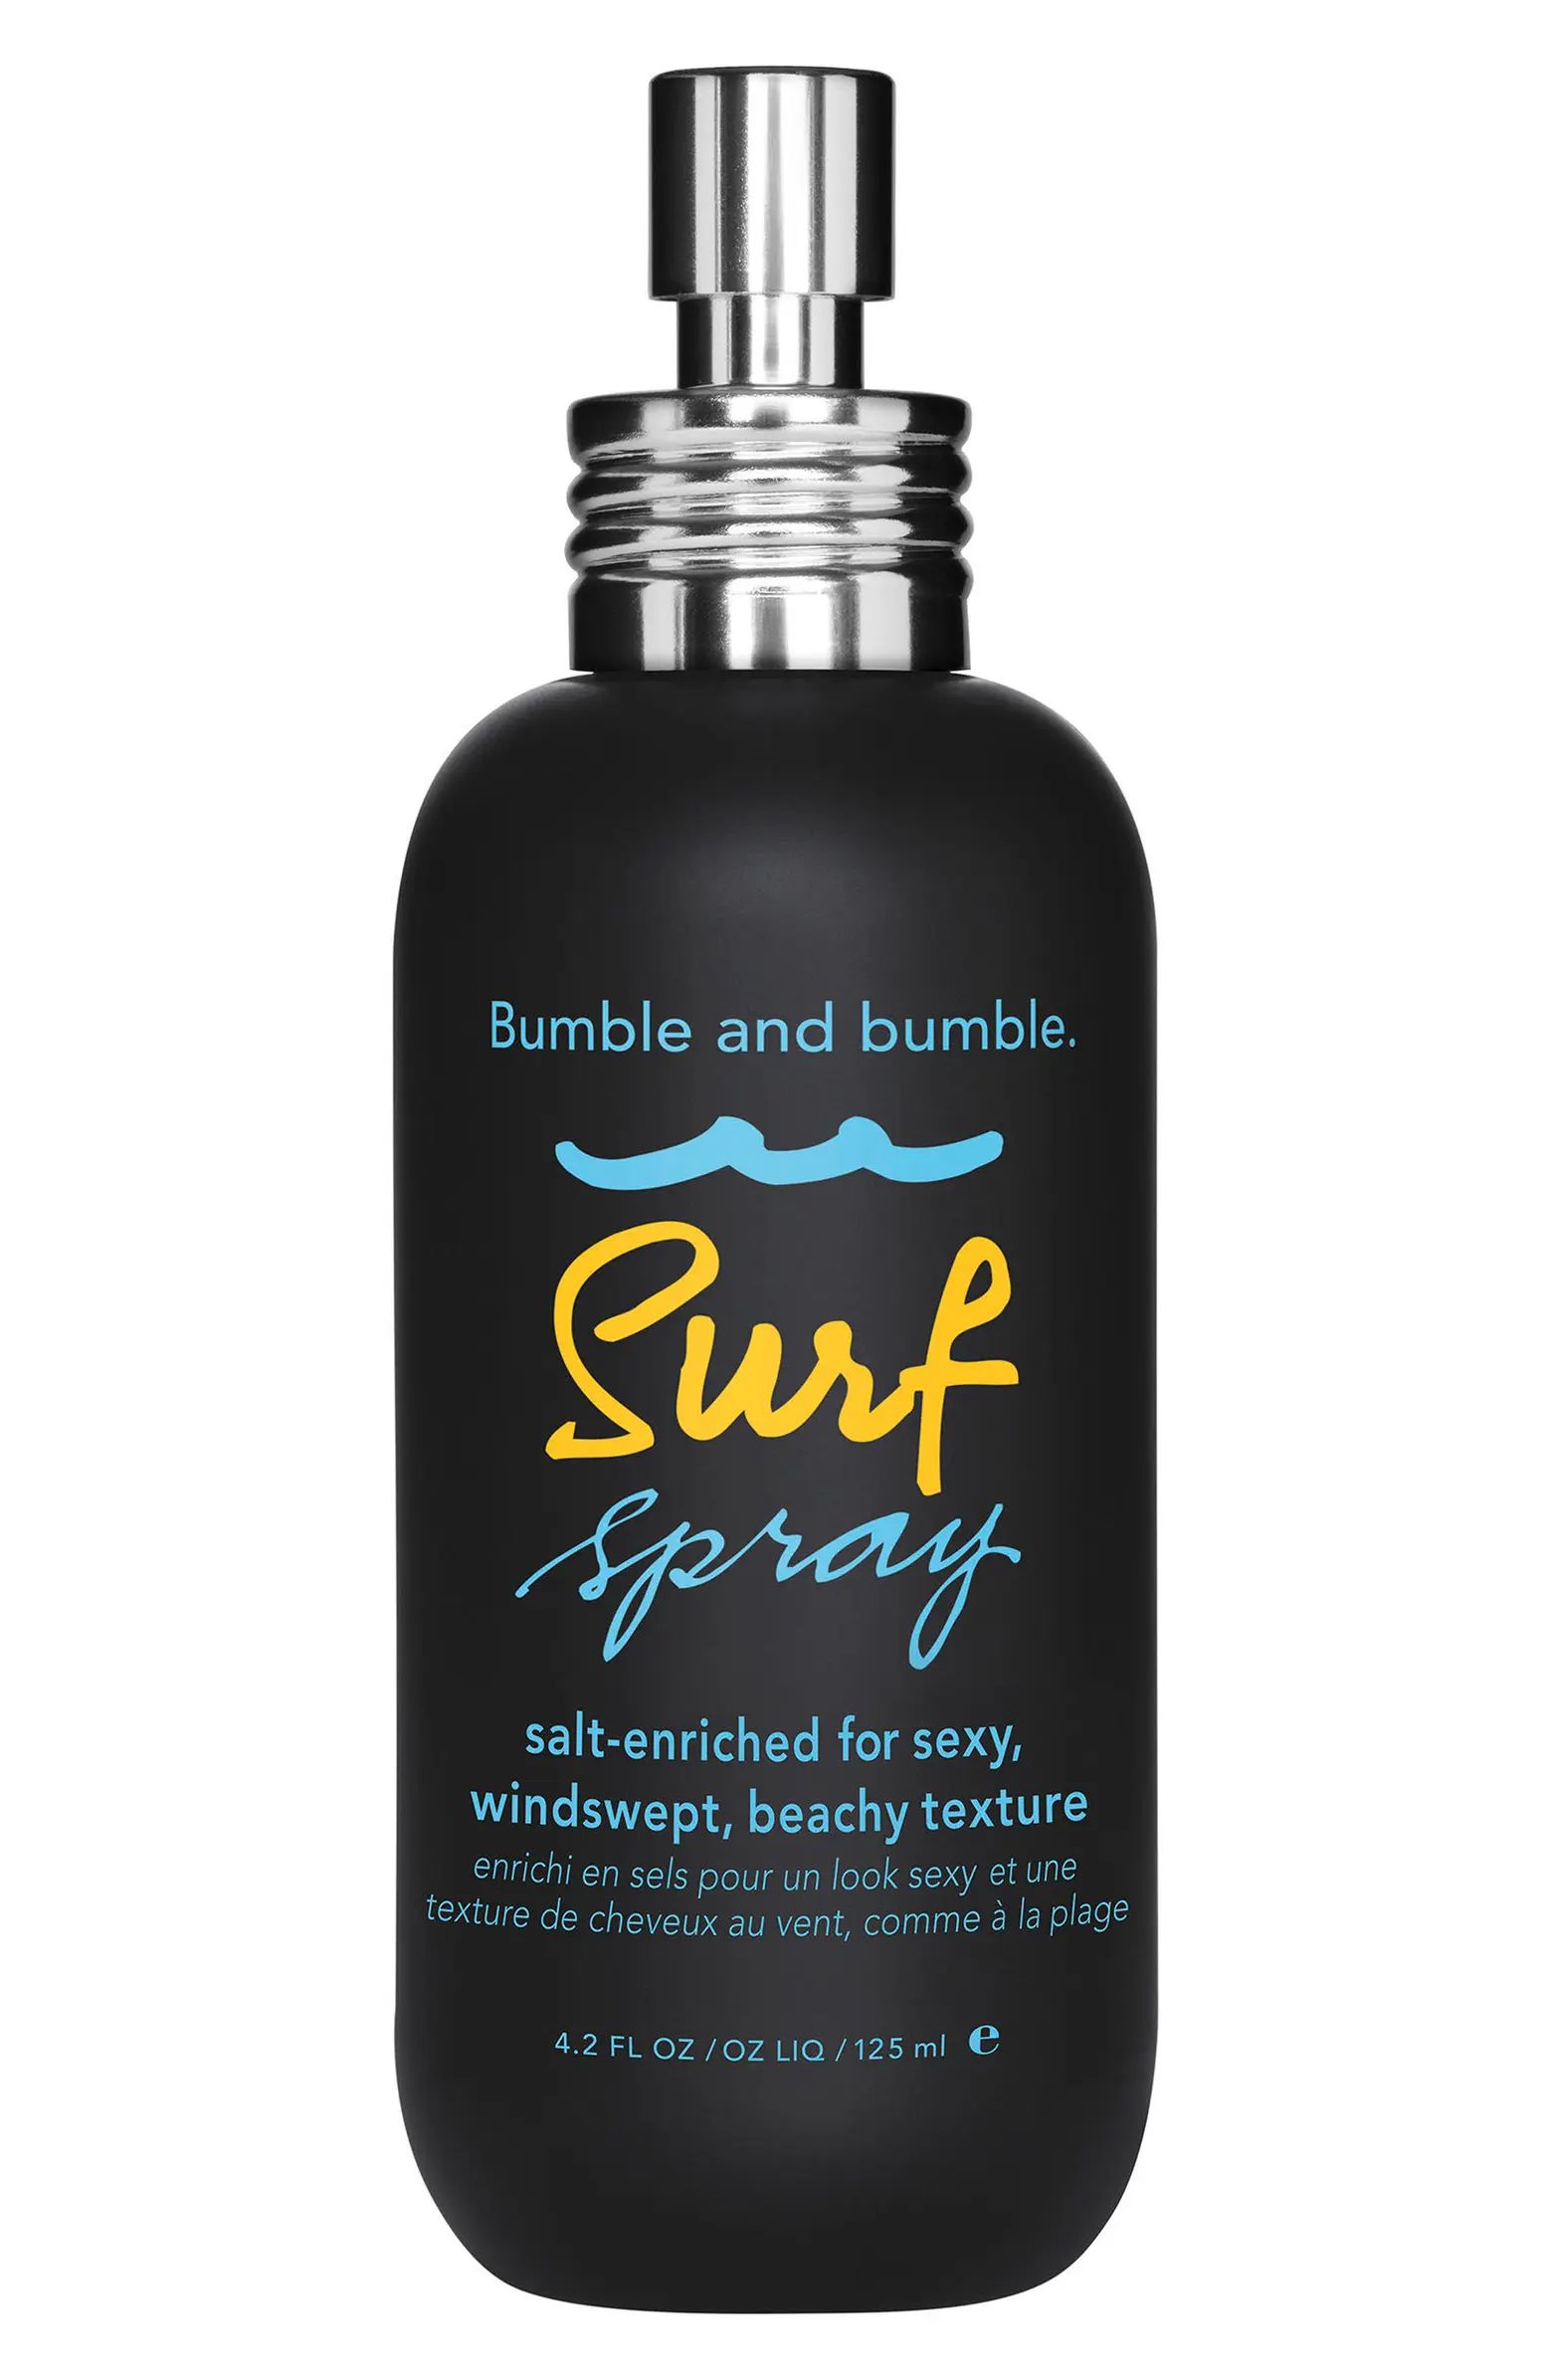 Bumble and bumble. Surf Spray | Nordstrom | Nordstrom